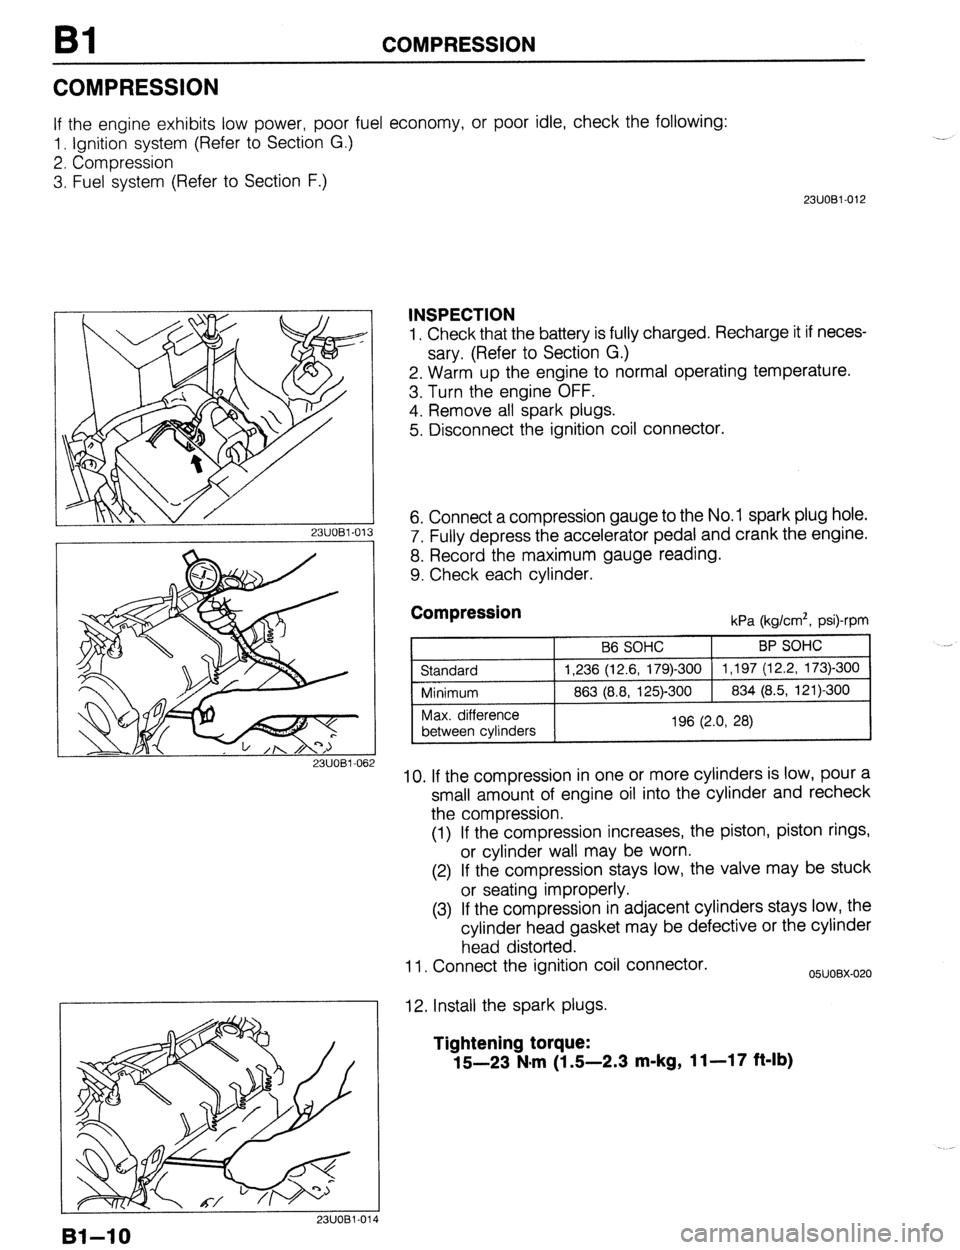 MAZDA PROTEGE 1992 Owners Guide Bl COMPRESSION 
COMPRESSION 
If the engine exhibits low power, poor fuel economy, or poor idle, check the following: 
1. Ignition system (Refer to Section G.) 
2. Compression 
3. Fuel system (Refer to